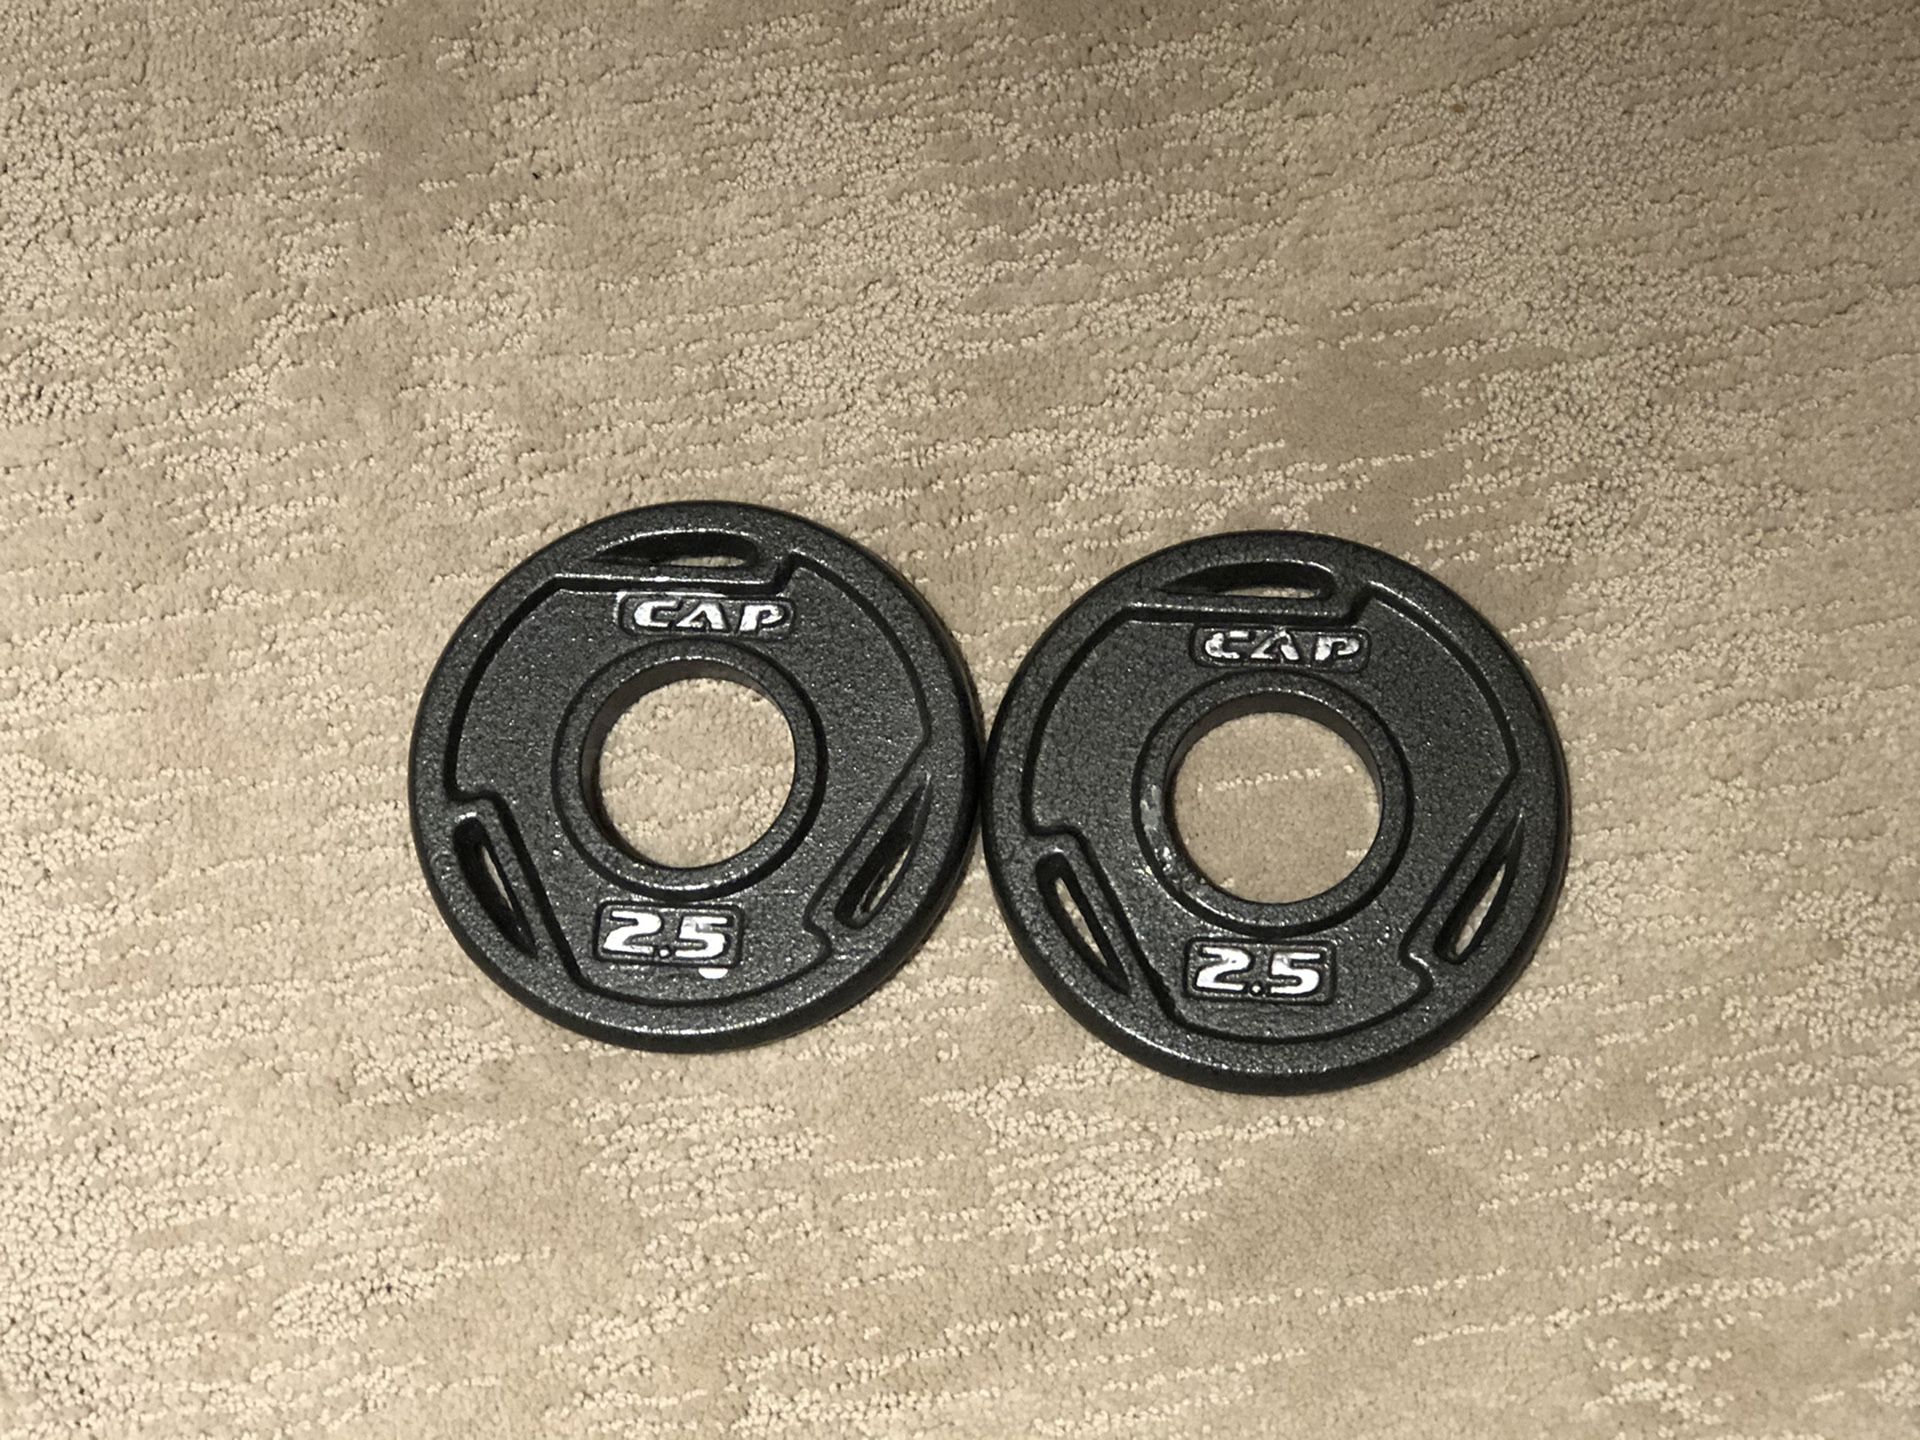 2.5-lb Olympic Weight Plates